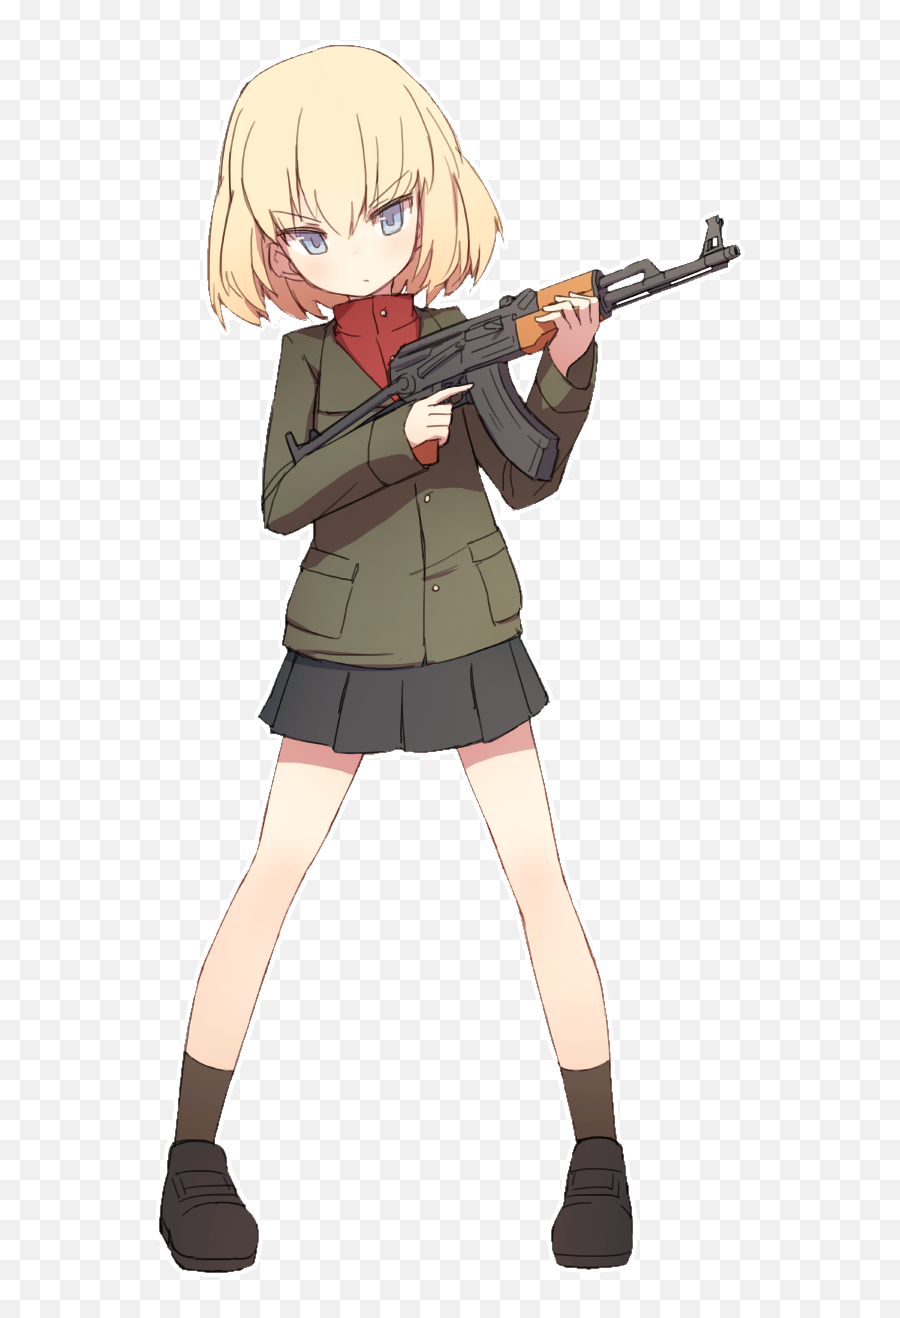 Download Anime Girl With Ak 47 Full Size Anime Girl With Gun Png Free Transparent Png Images Pngaaa Com